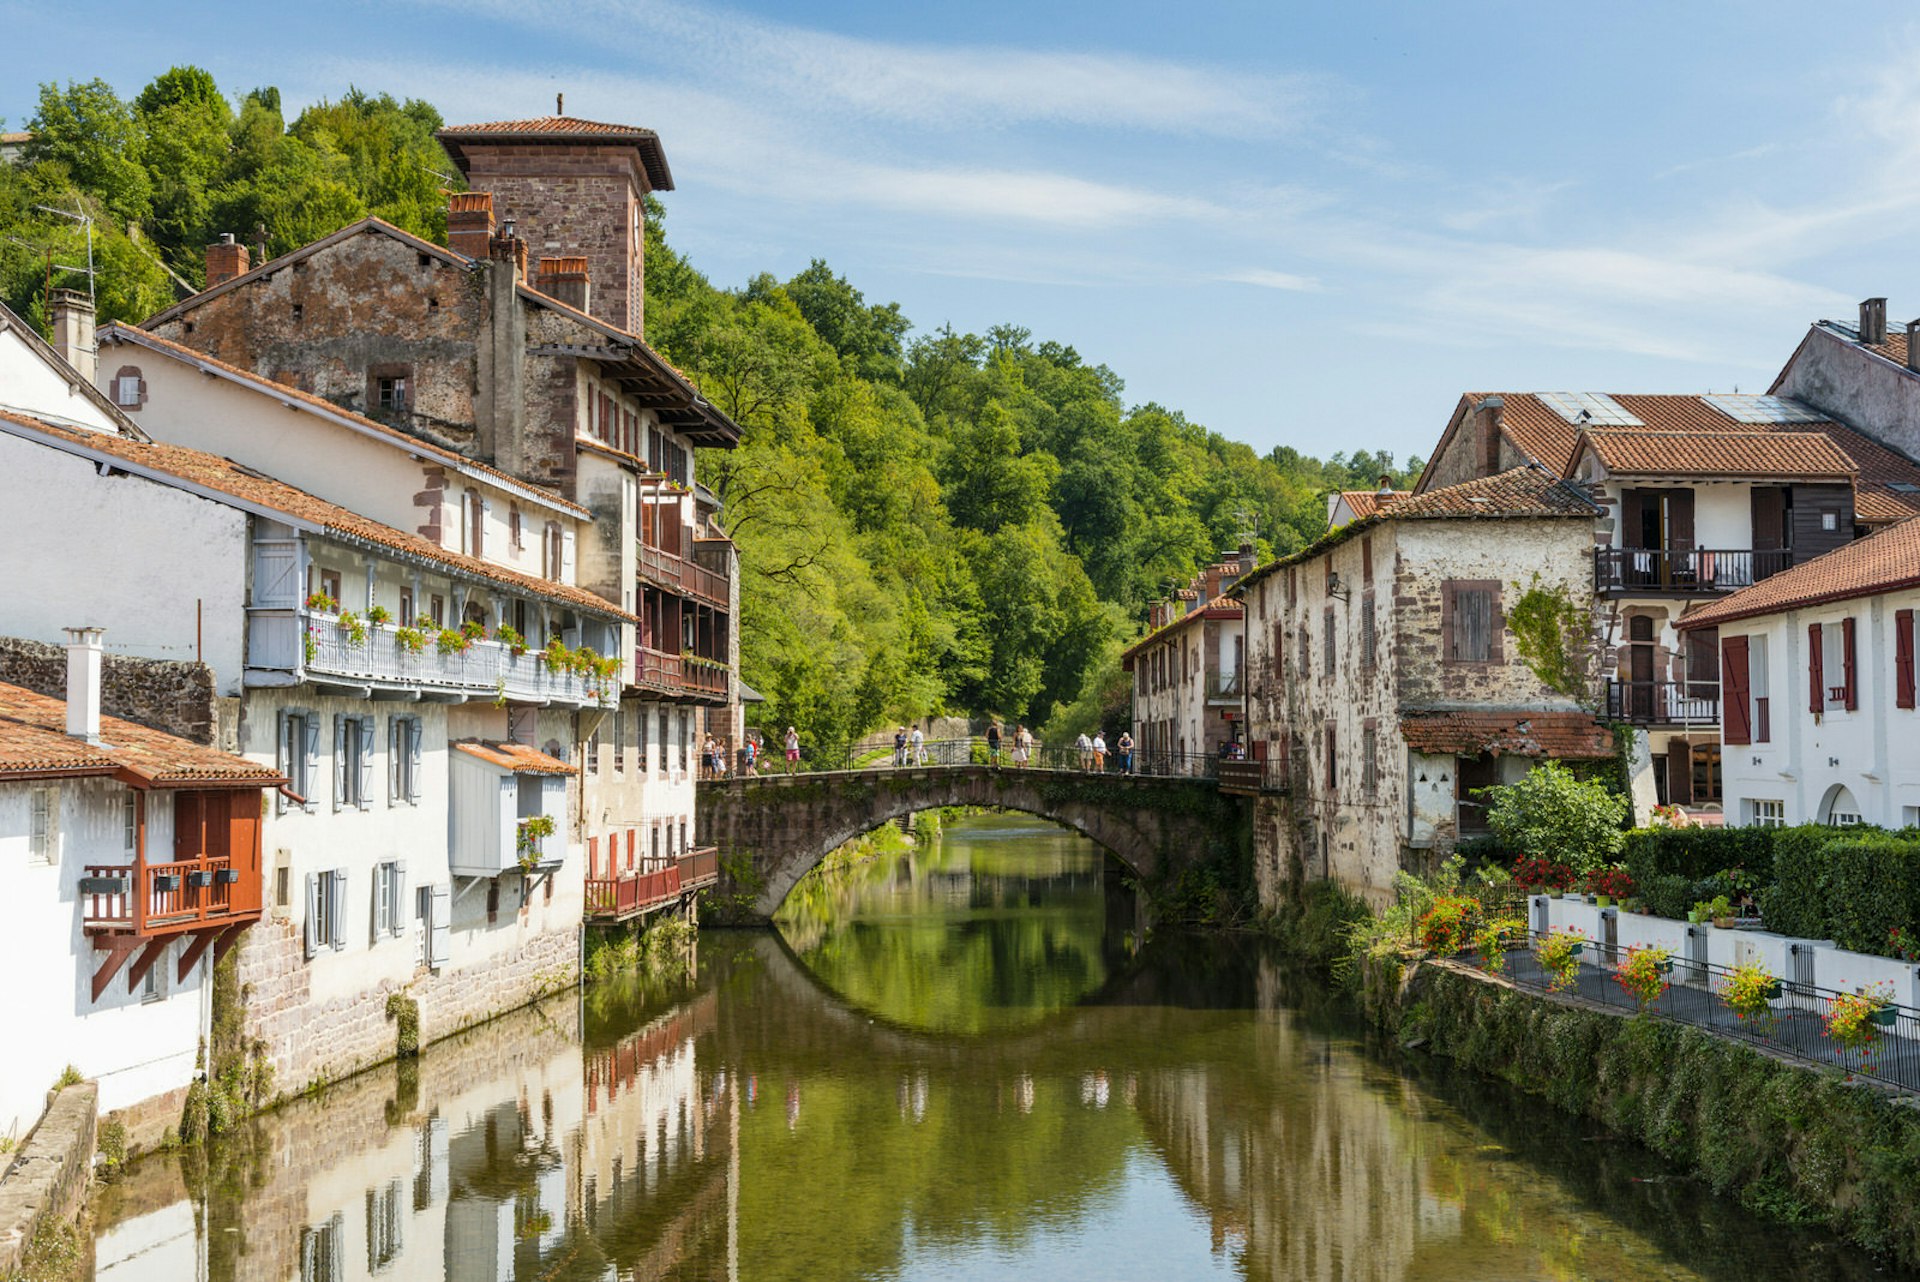 St-Jean Pied de Port is the gorgeous starting point for many pilgrims